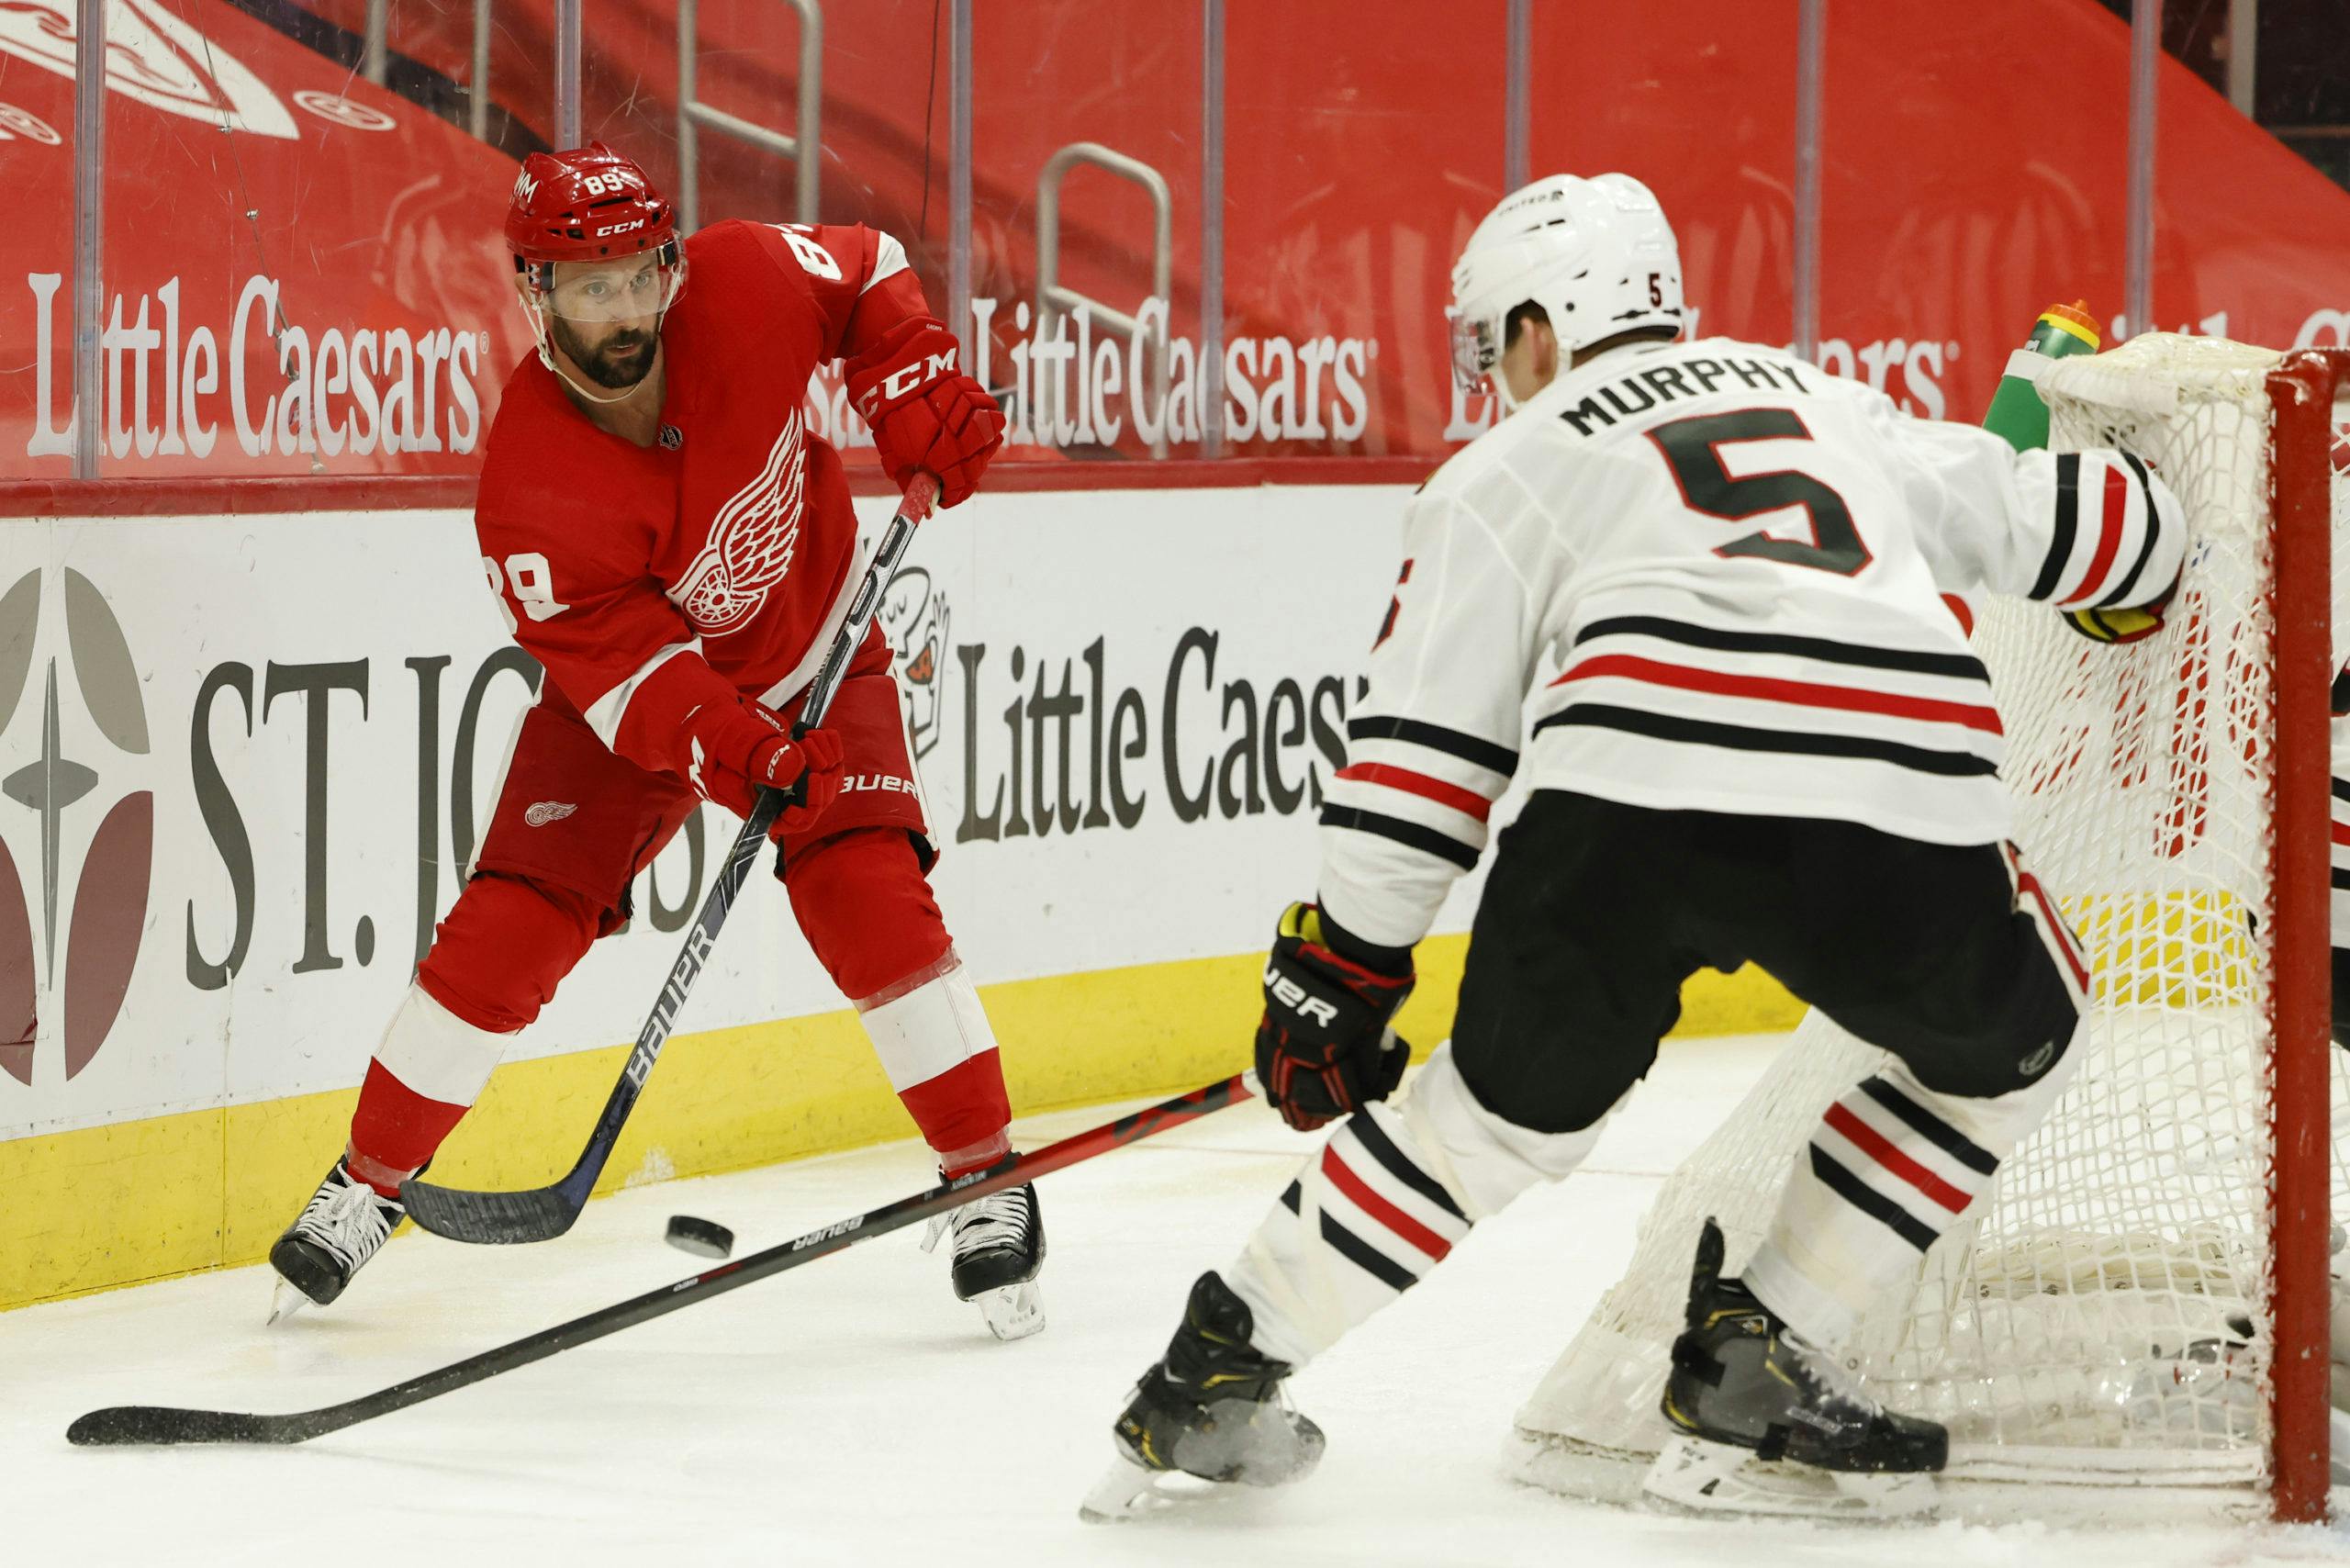 Detroit Red Wings center Sam Gagner (89) skates with the puck defended by Chicago Blackhawks defenseman Connor Murphy (5) in the second period at Little Caesars Arena.